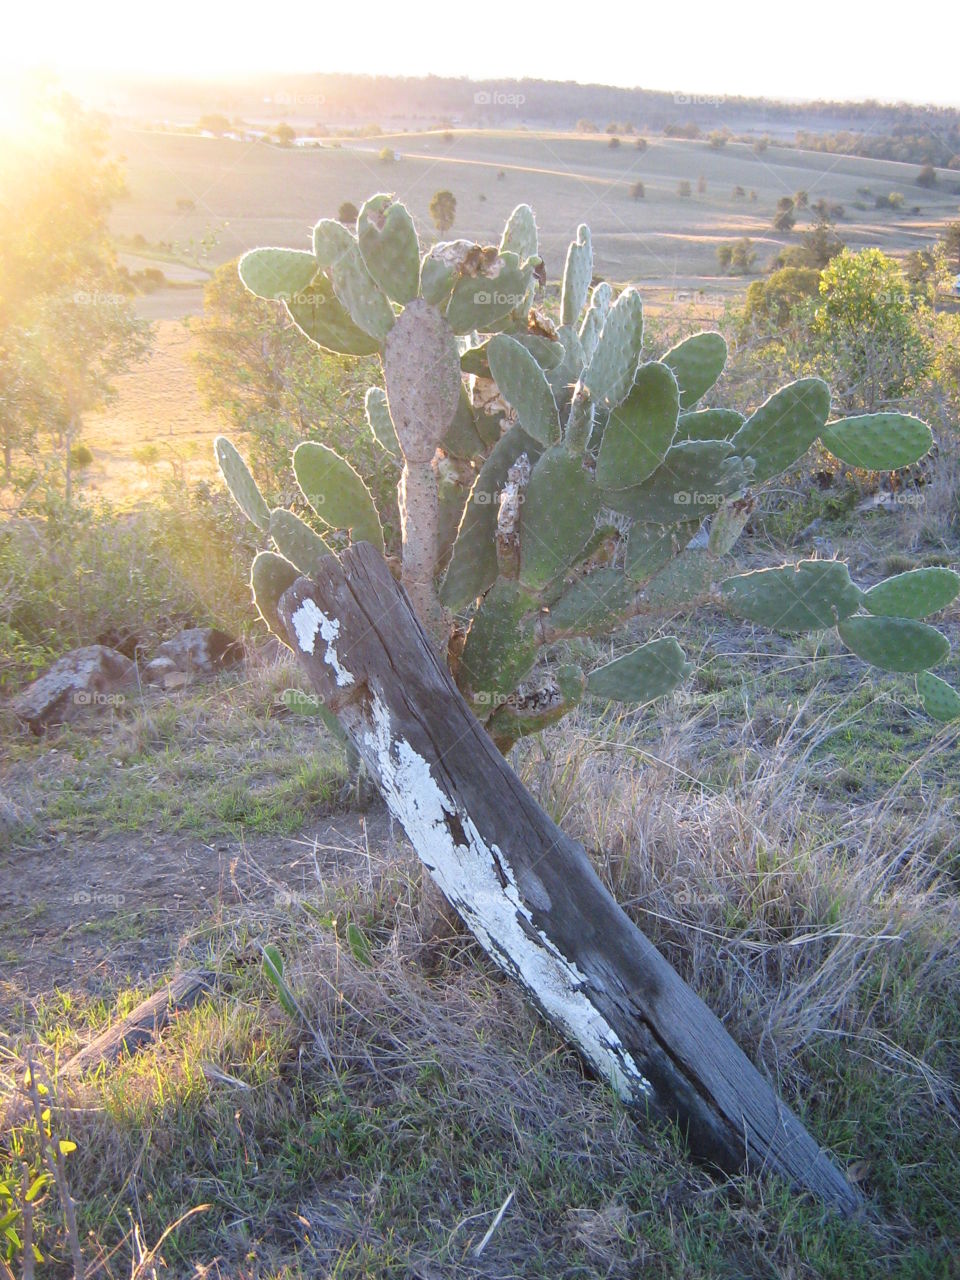 Queensland Australia country scene, an old fence and cactus